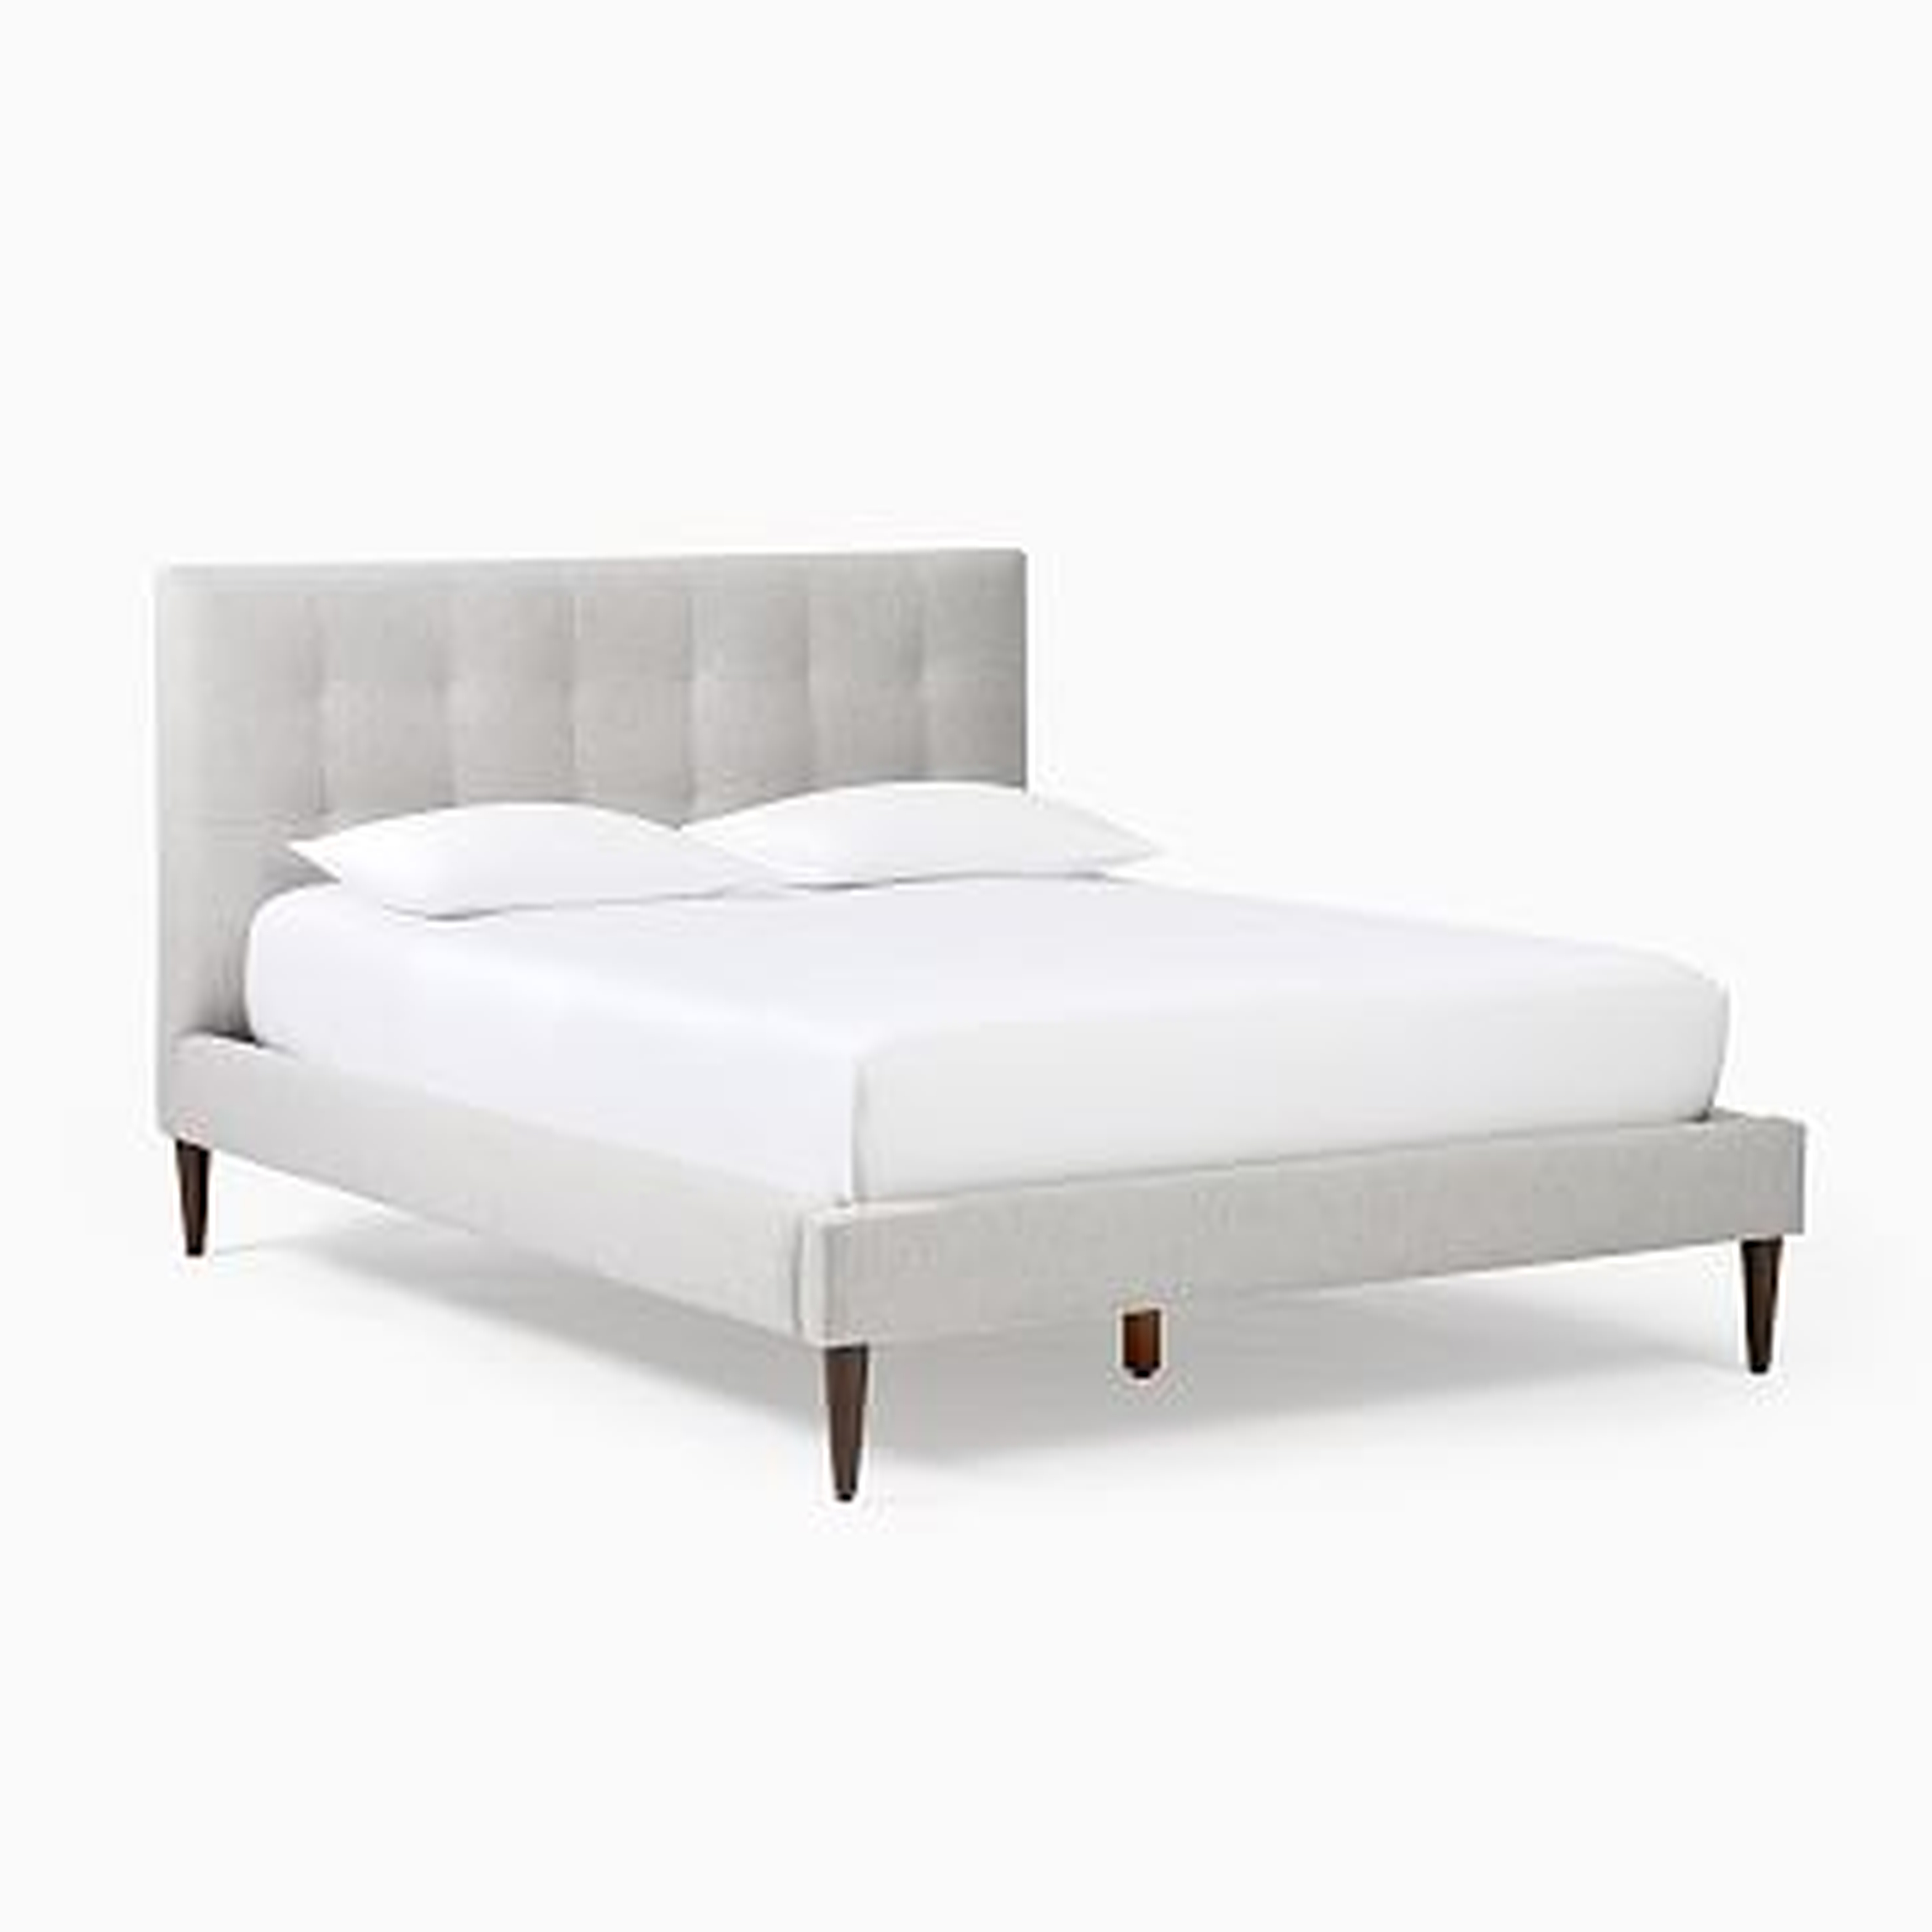 Grid Tufted Bed, King, Feather Gray - West Elm